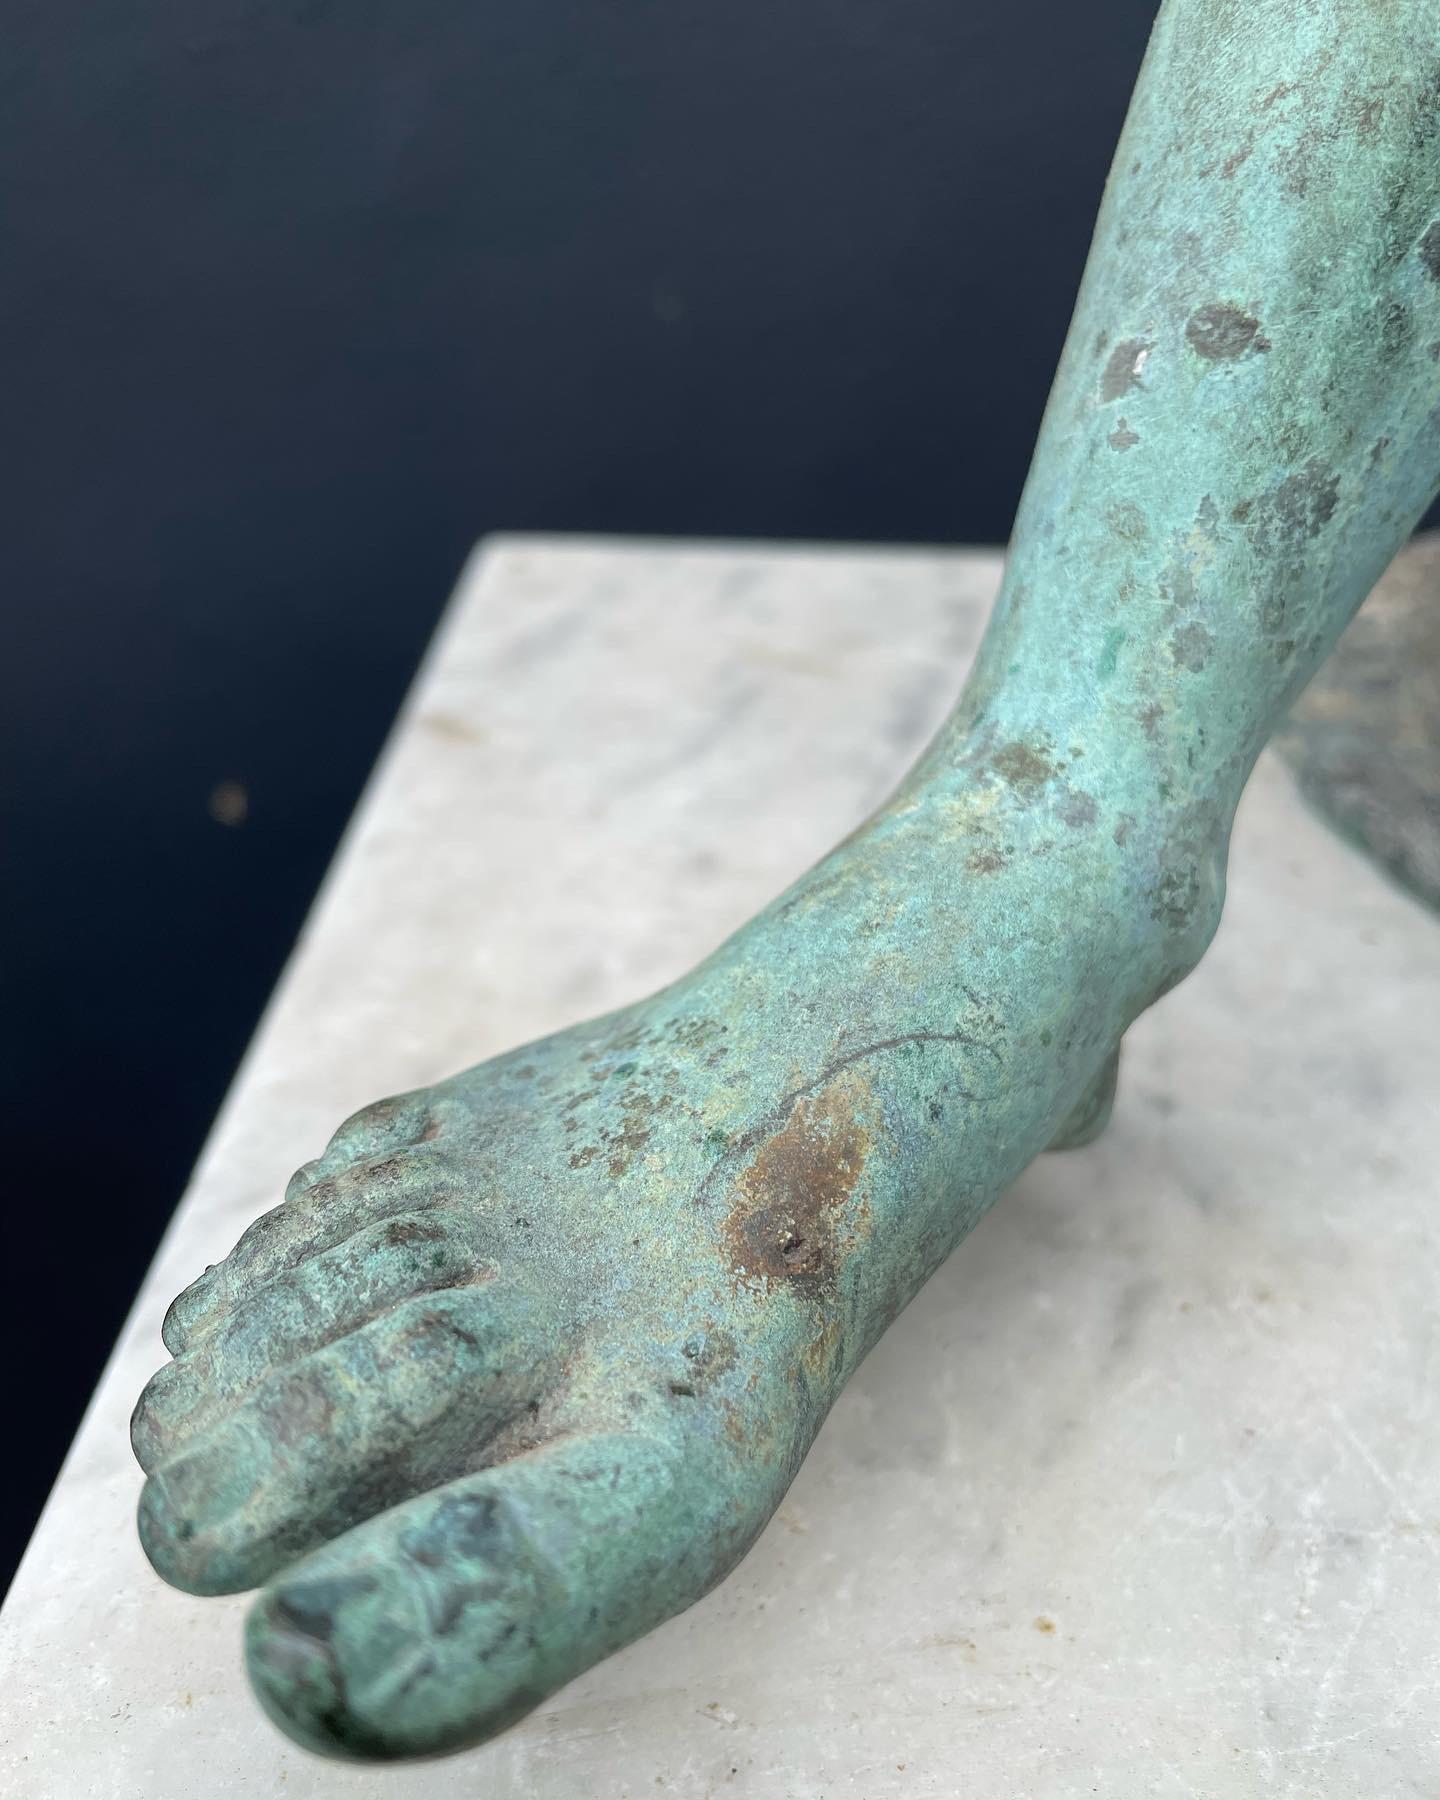 Large bronze sculpture of Hermes, sitting on a fountain, after the antique, with a beautiful green patina and mounted on a white marble block.

This piece would sit right at home amongst a Grand Tour collection.